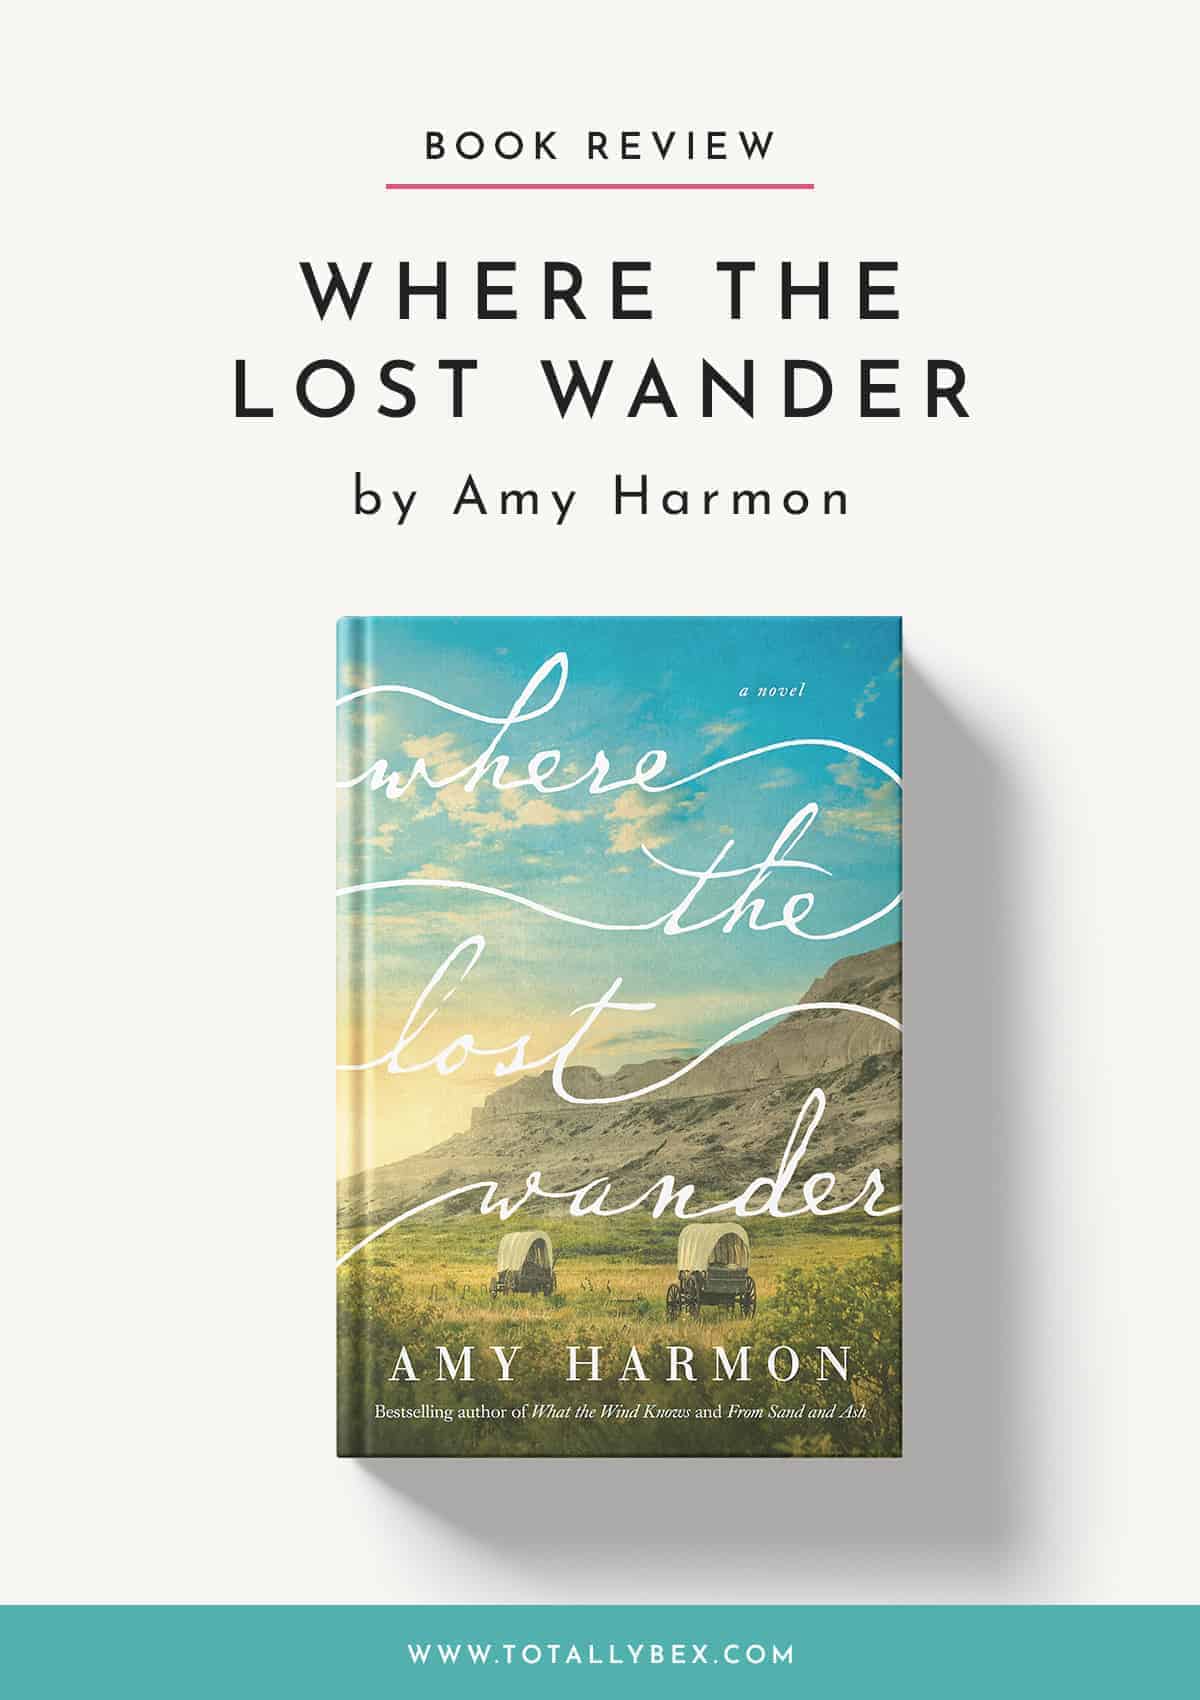 Where the Lost Wander by Amy Harmon-Book Review